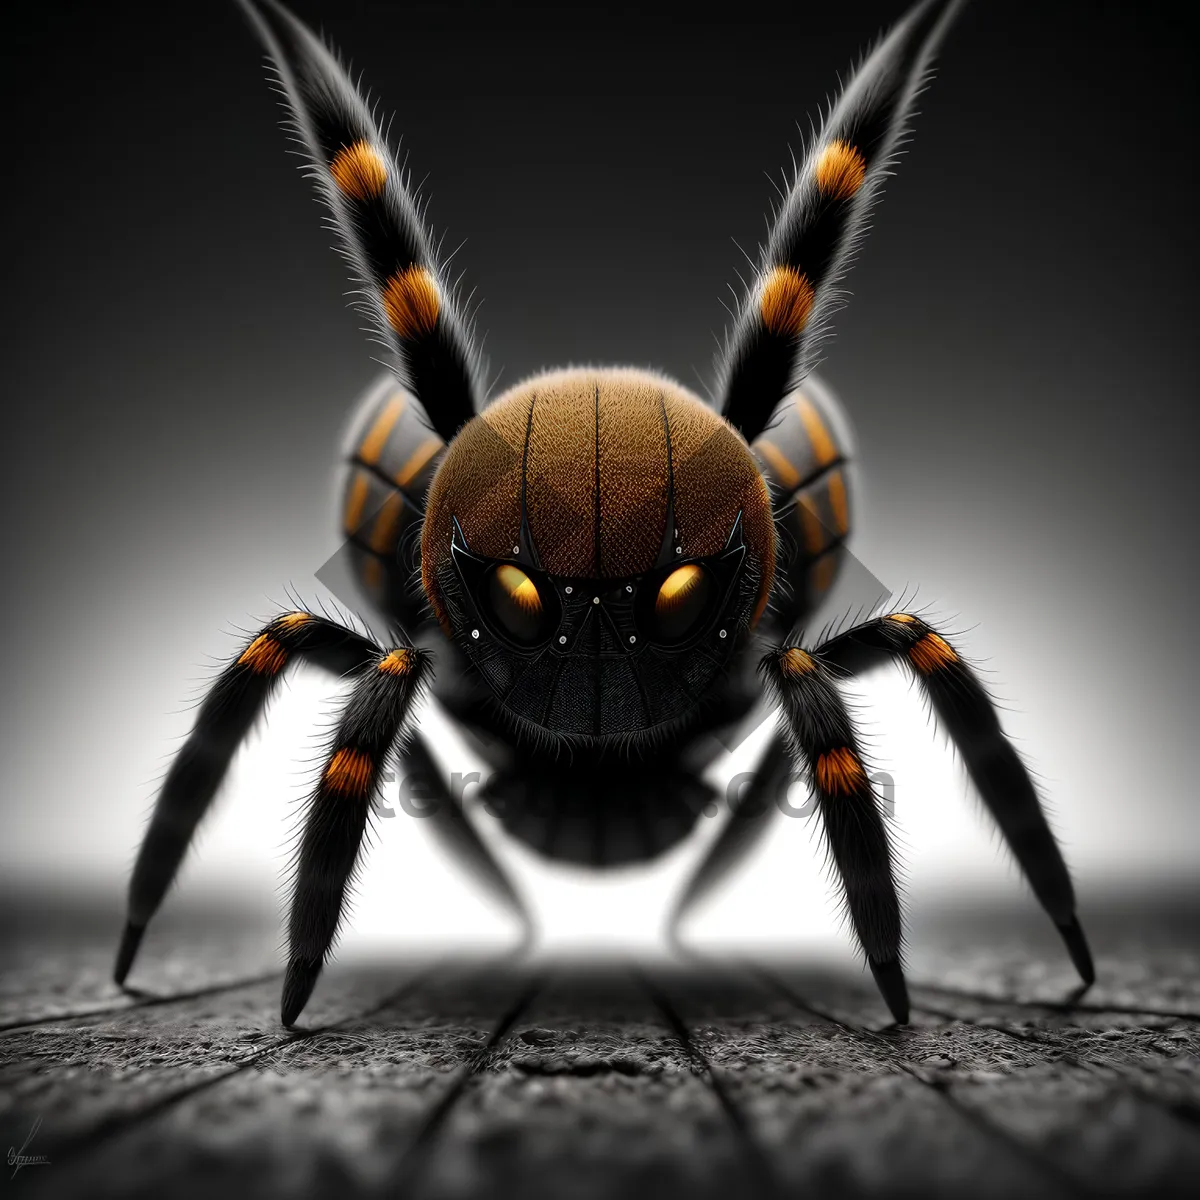 Picture of Creepy Black Widow Spider Close-up with Hairy Legs